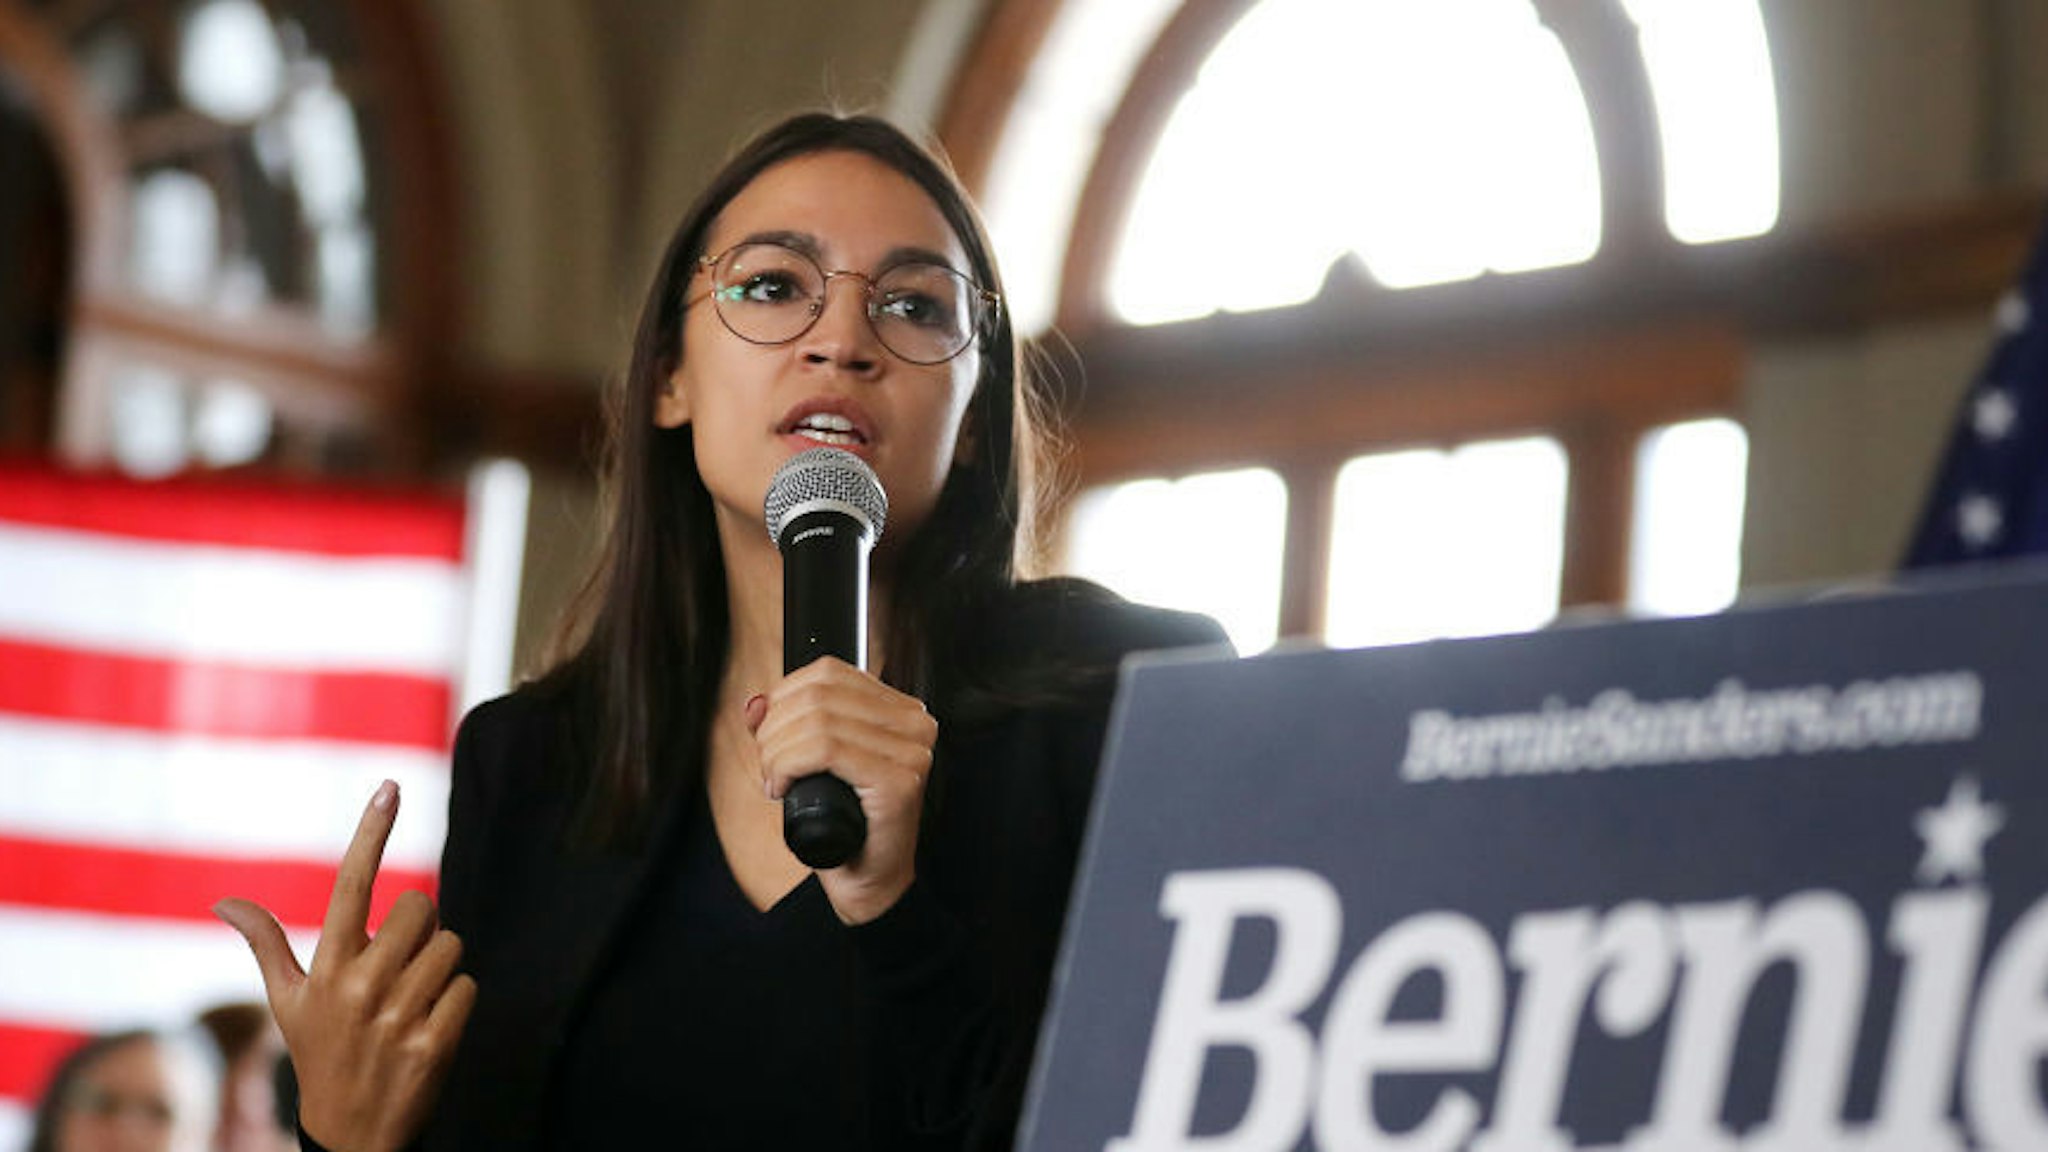 Rep. Alexandria Ocasio-Cortez (D-NY) speaks during a campaign event with Democratic presidential candidate Sen. Bernie Sanders (I-VT) at La Poste January 26, 2020 in Perry, Iowa. A New York Times/Siena College poll conducted January 20-23 places Sanders at the top of a long list of Democrats seeking the presidential nomination with 25-percent of likely Iowa caucus-goers naming him as their first choice. Candidates former South Bend, Indiana Mayor Pete Buttigieg, former Vice President Joe Biden and Sen. Elizabeth Warren (D-MA) are polling at 18, 17 and 15-percent, respectively. (Photo by Chip Somodevilla/Getty Images)